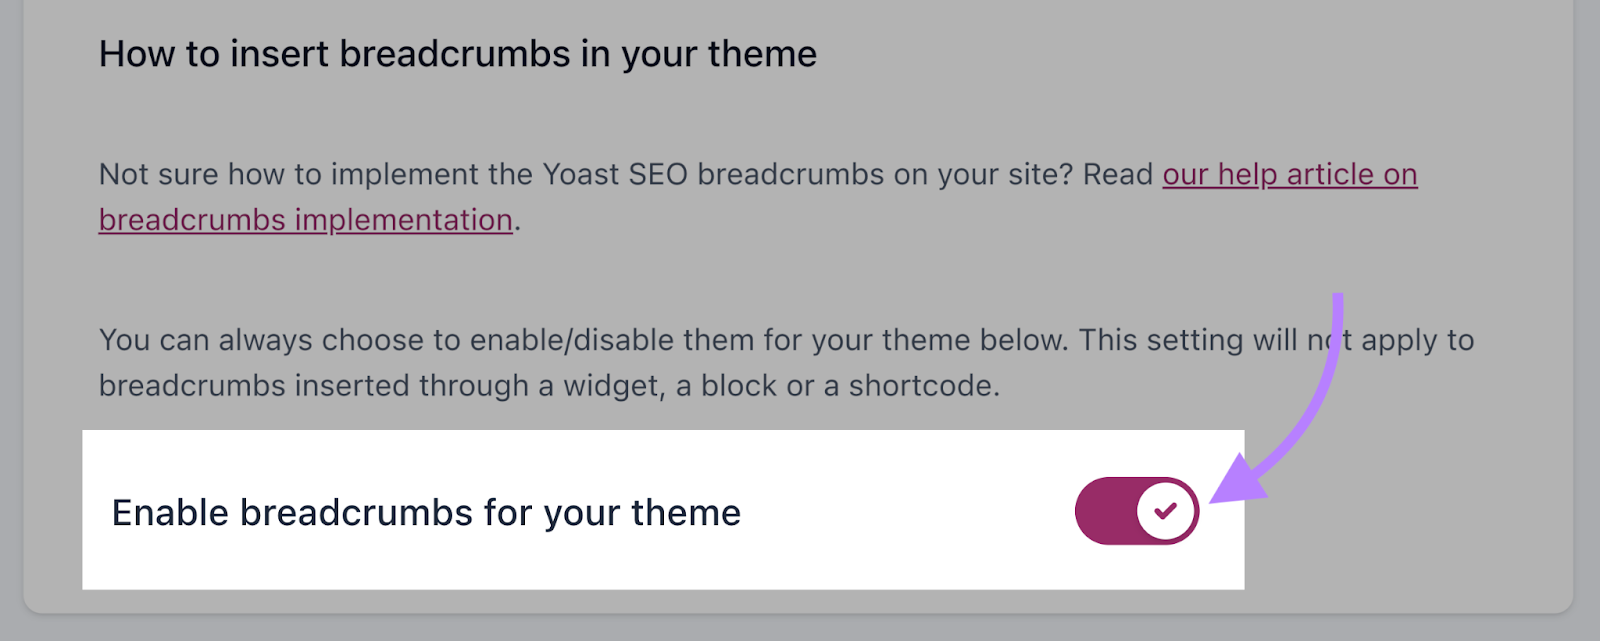 Enable breadcrumbs for your theme